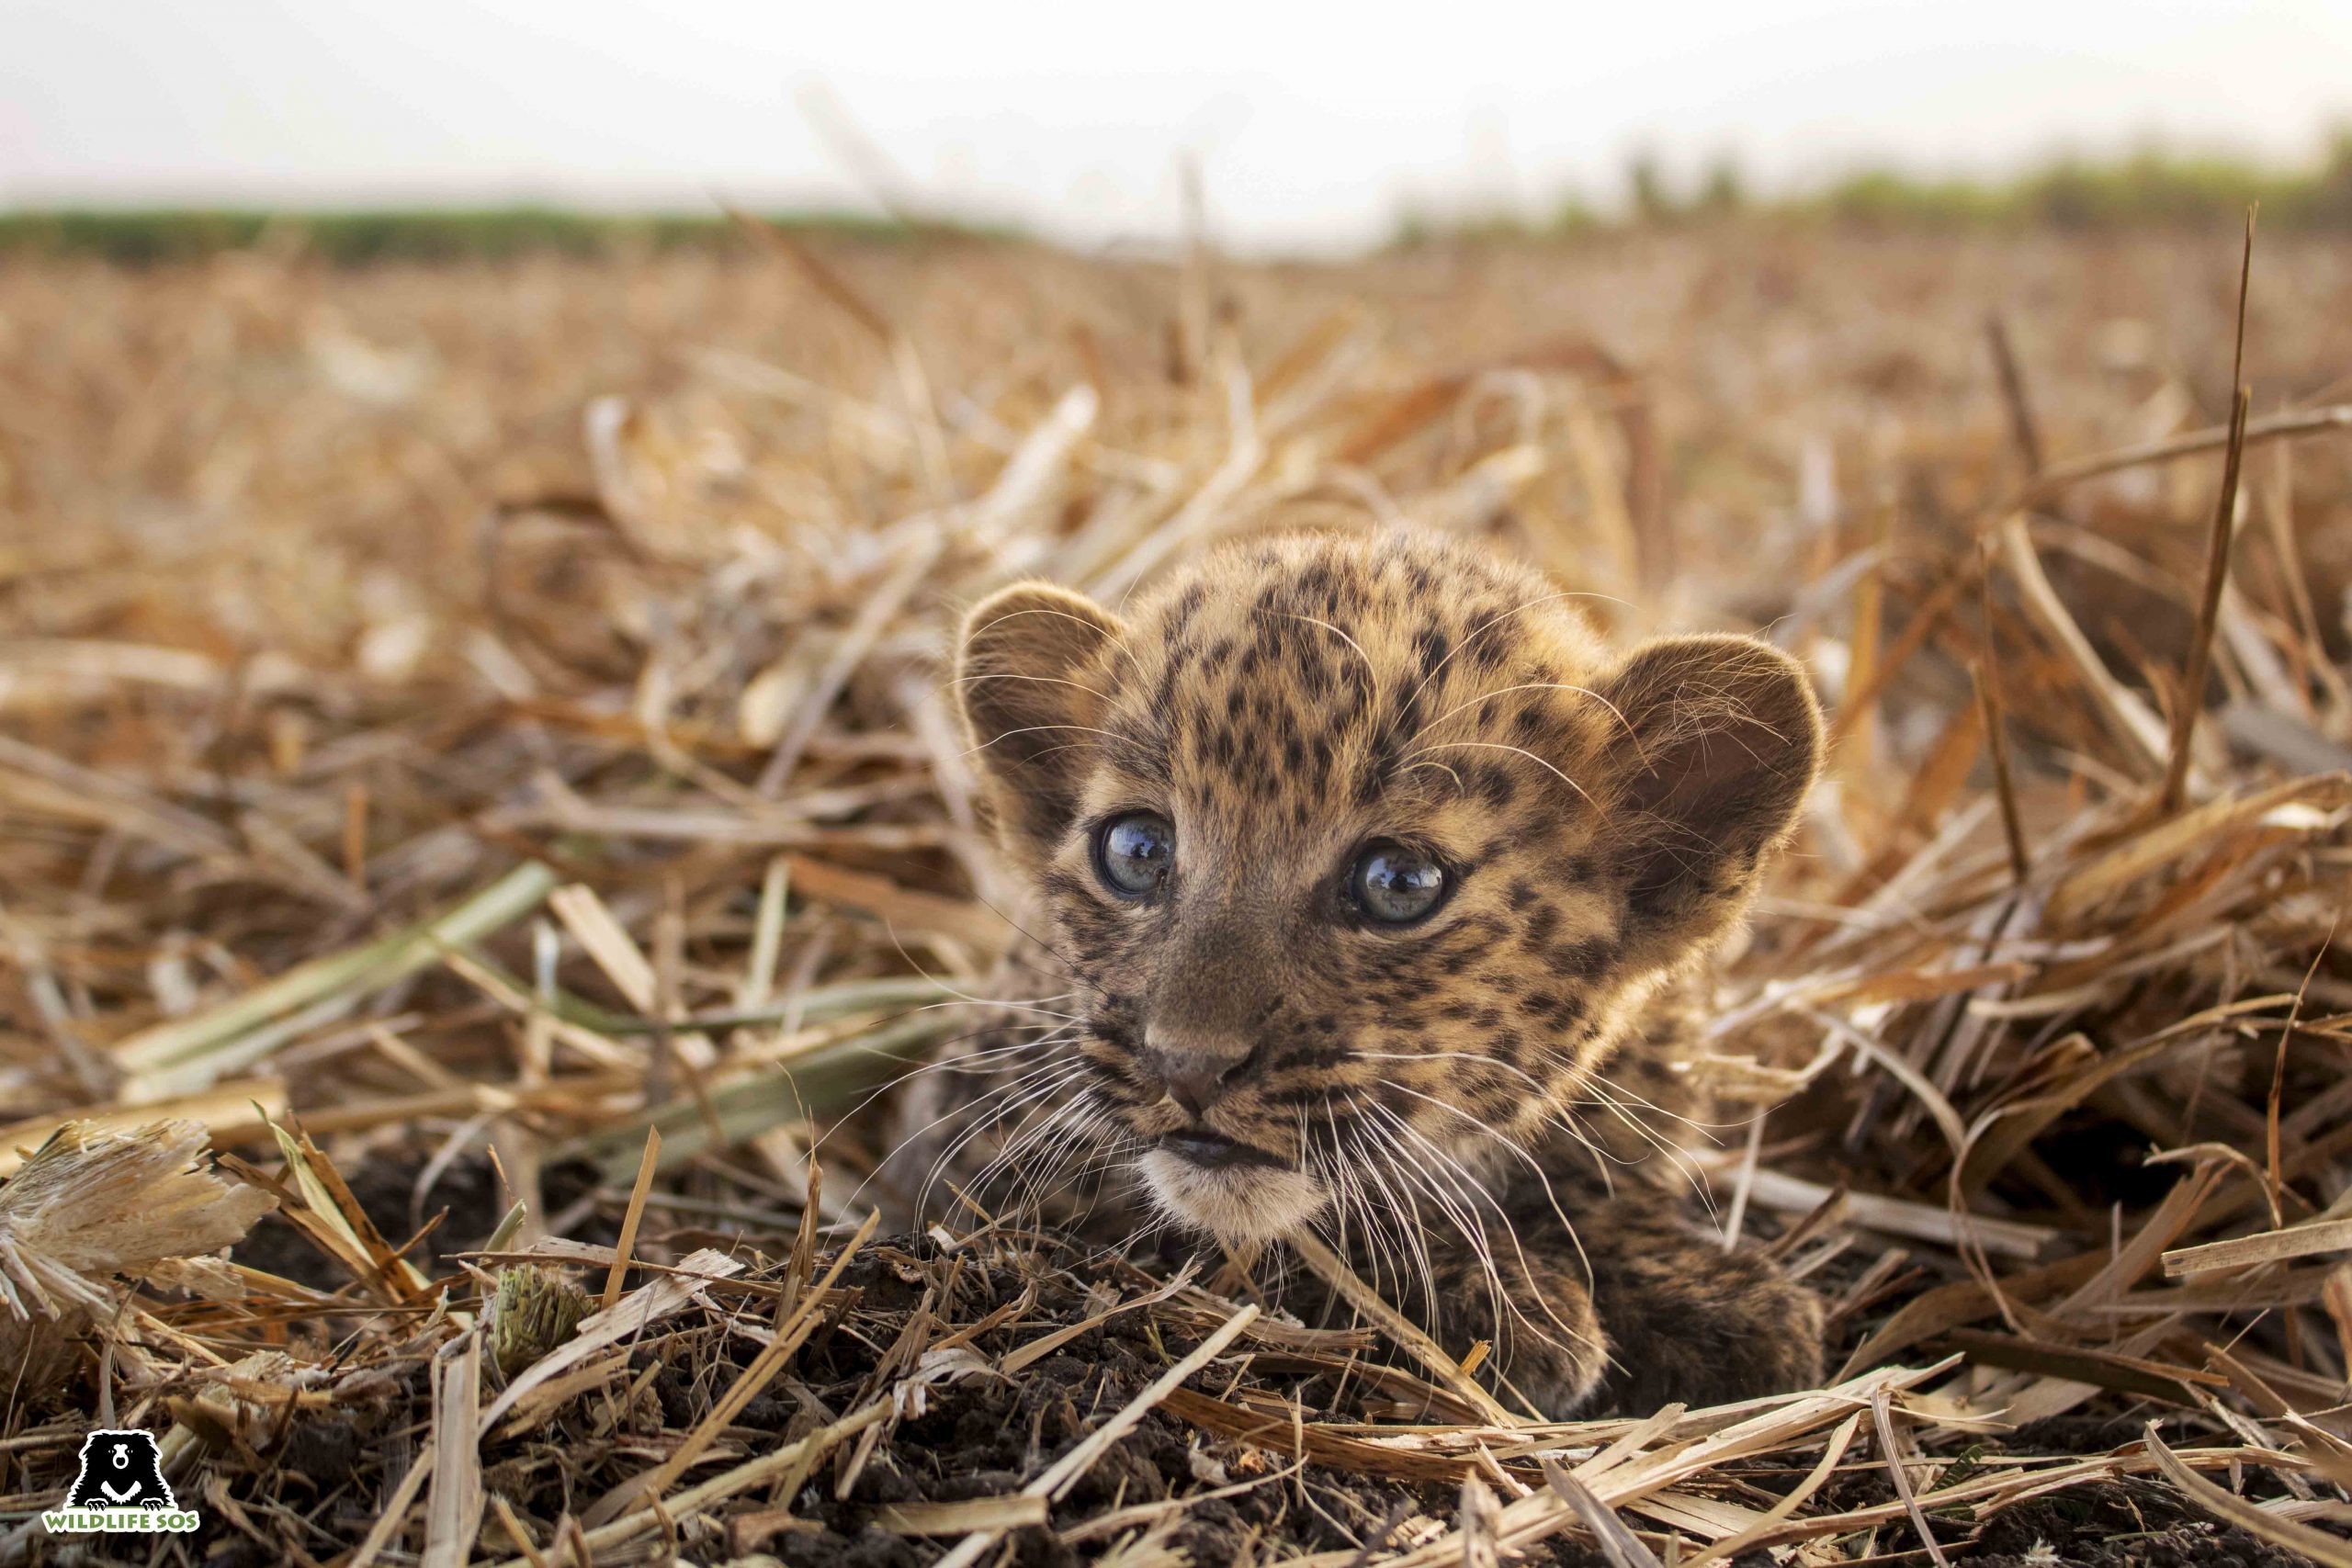 Encounters with leopard cubs increases during harvest season in Maharashtra (1)